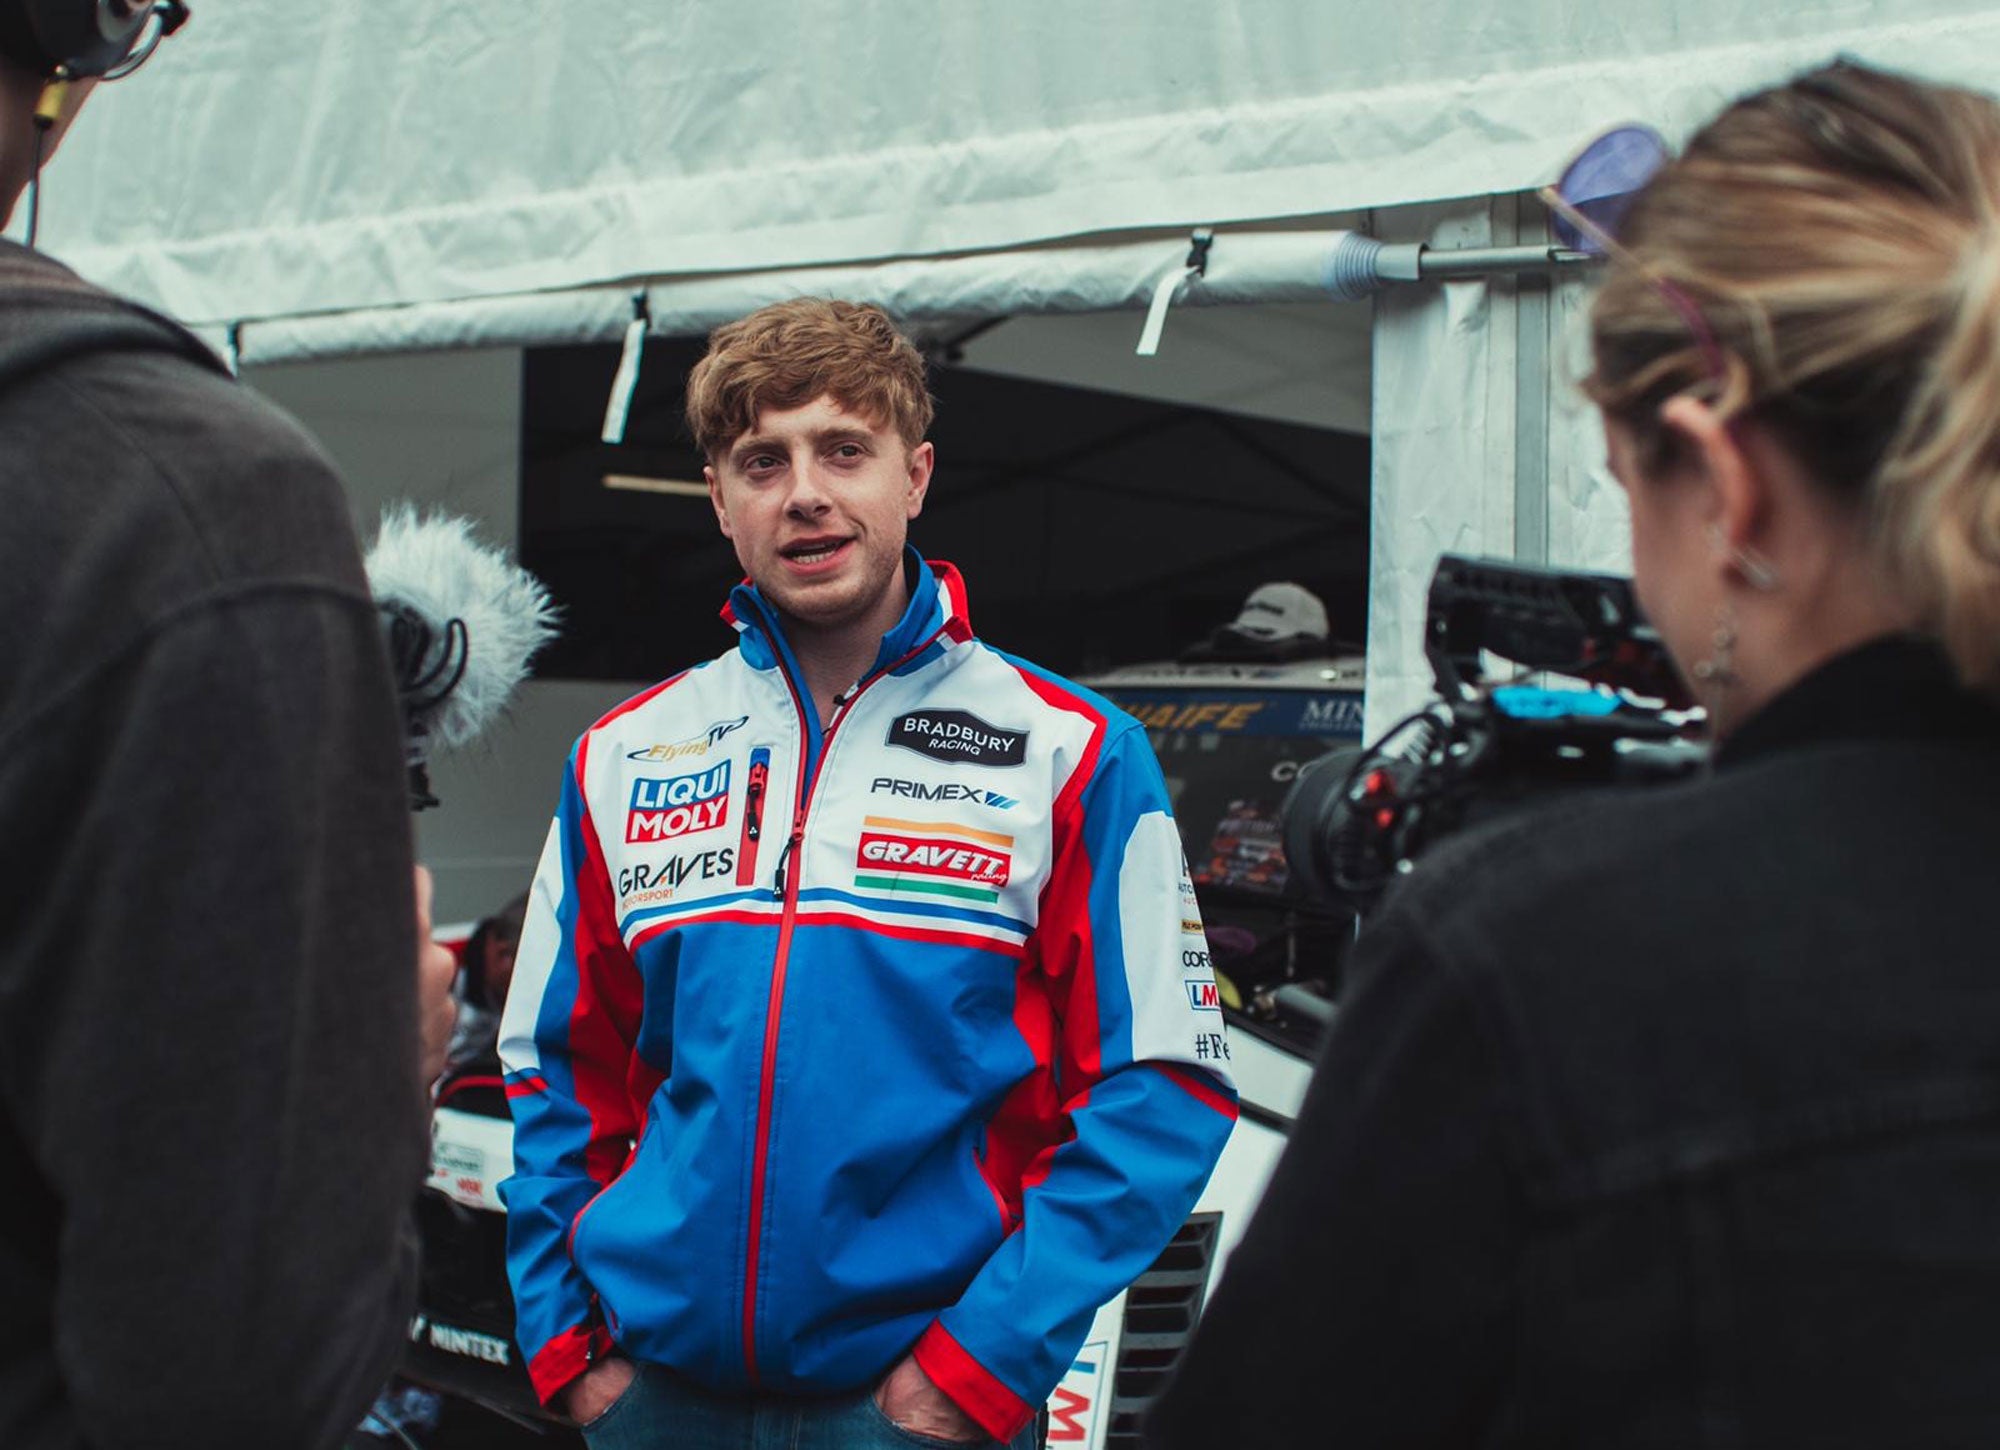 Bradley Gravett son of BTCC British Touring Car Champion Robb Gravett in the MINI Challenge JCW Series at Brands Hatch Indy in 2022 Bradley Being Interviewed by PolyChrome Studios Graves Motorsport Cooper Racing Driver LIQUI MOLY LM Performance